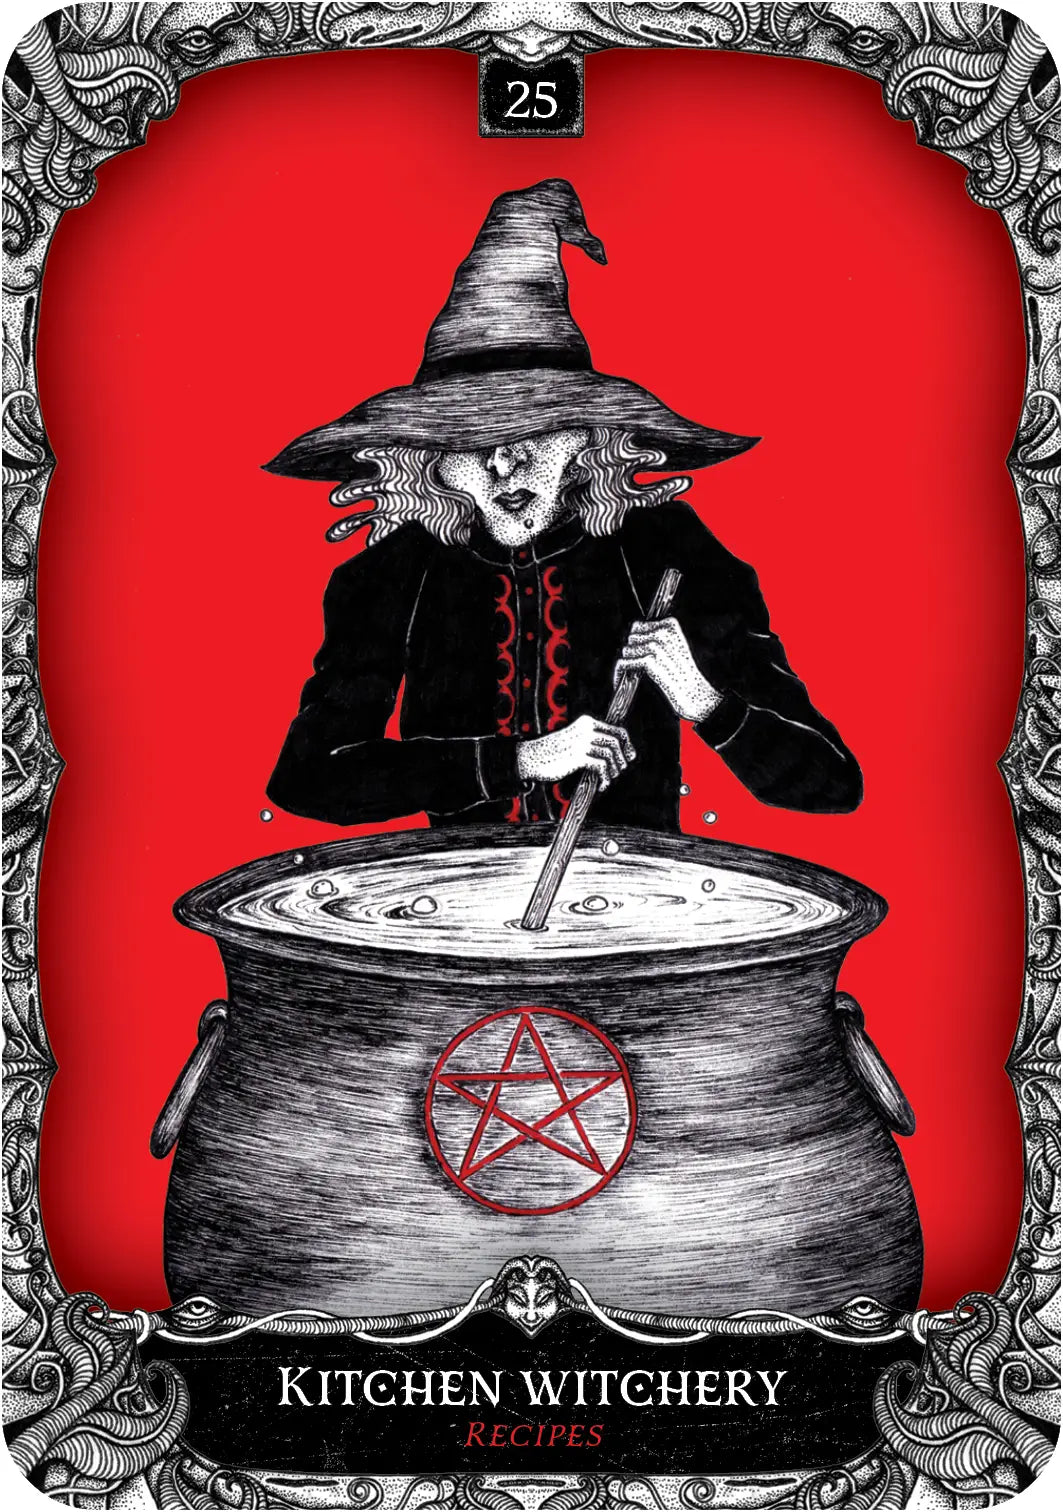 Oracle of the Witch: Reclaim Your Birthright